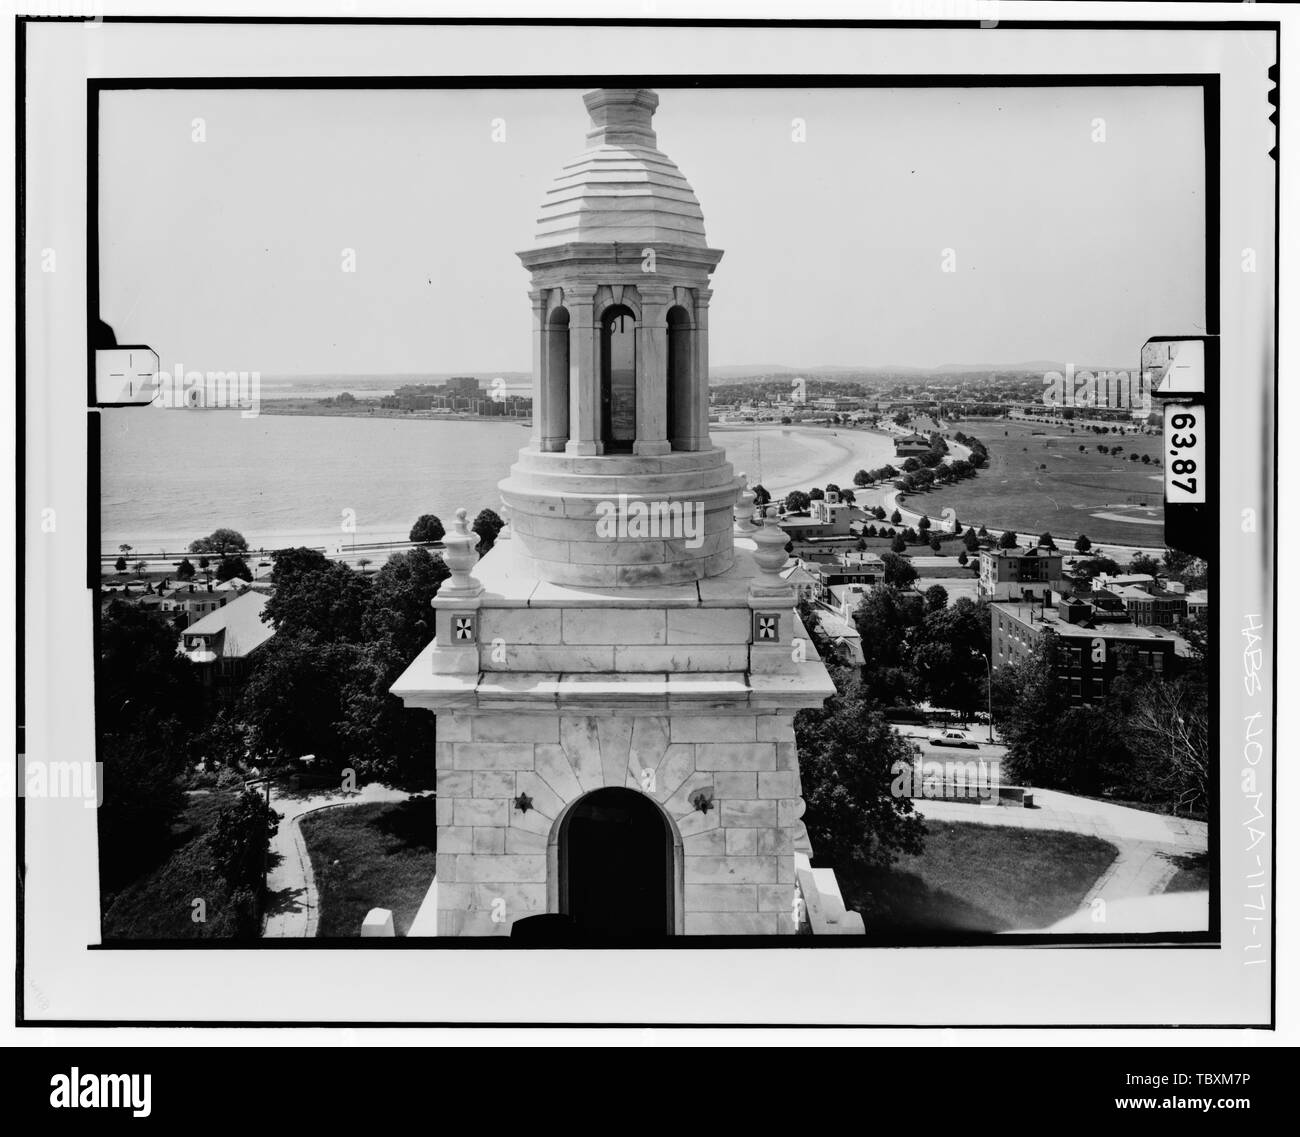 NORTH ELEVATION, LEVEL 5 Copy photograph of photogrammetric plate LCHABSGS11D1981N6R.  Dorchester Heights Monument, Thomas Park, Boston, Suffolk County, MA Peabody and Stearns Washington, George Burns, John A, field team Lawrence, Jeanne C, field team Alderson, Caroline R, field team Cronenberger, Richard J, project manager Graham, William J, field team Marsh, David T, field team Lowe, Jet, photographer Dennett, Muessig and Associates, Limited, photographer Taylor, Douglas R, delineator Schiller, Angela J, delineator Trumbull, Rebecca, delineator Stock Photo